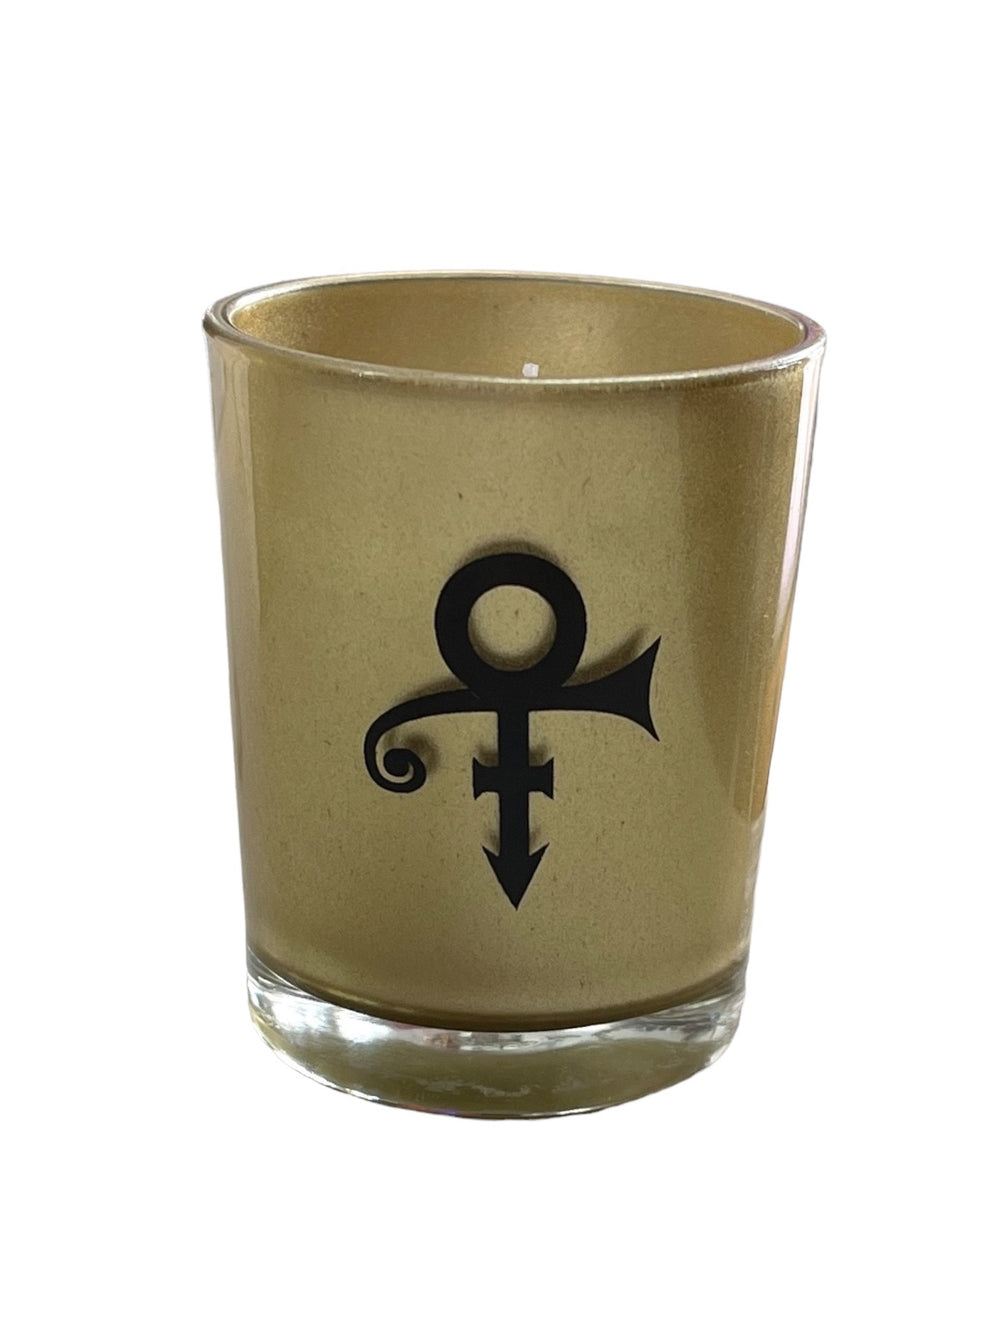 Prince – The Gold Experience Love Symbol Candle/Holder XCLUSIVE Official Merchandise Prince